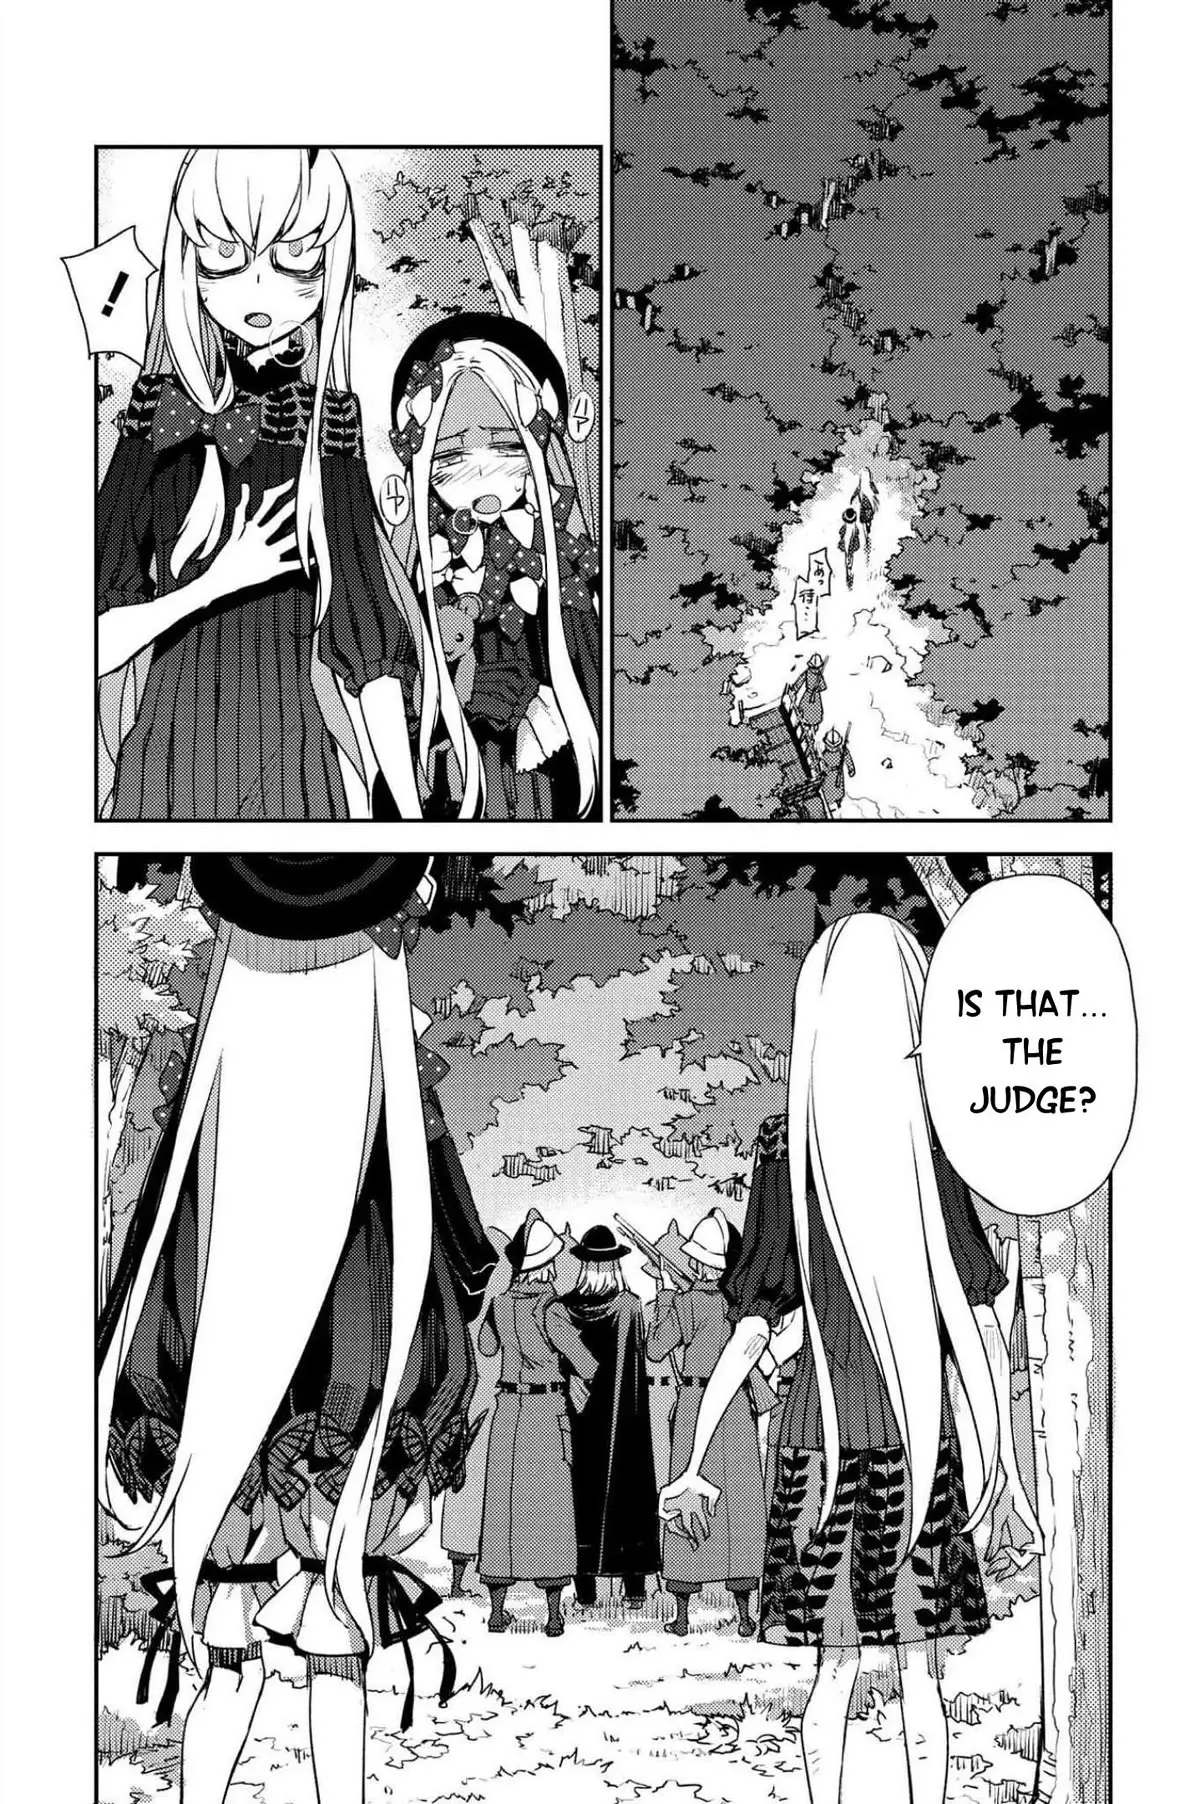 Fate/grand Order: Epic Of Remnant - Subspecies Singularity Iv: Taboo Advent Salem: Salem Of Heresy - 23 page 5-2b18dd54